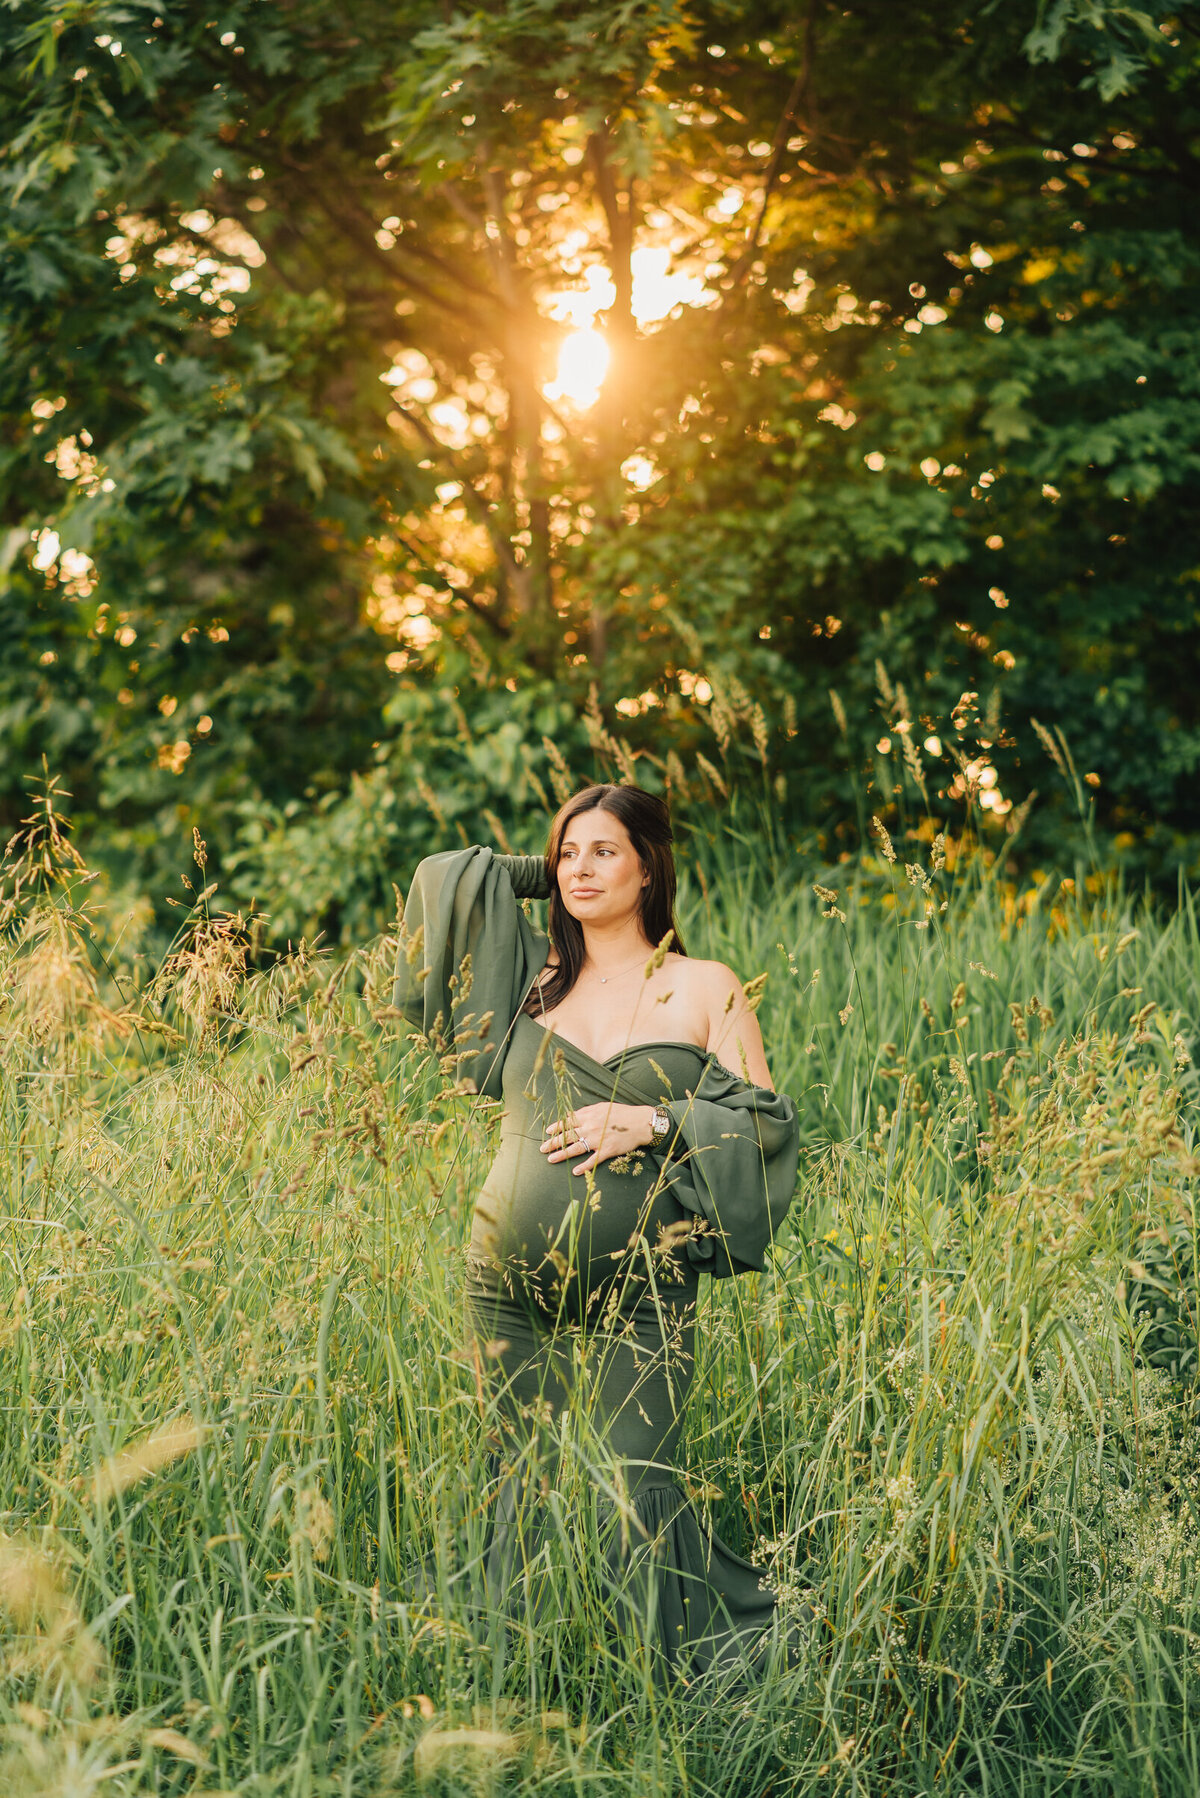 A pregnant mom in a field of green grass, wearing a green dress and looking off camera